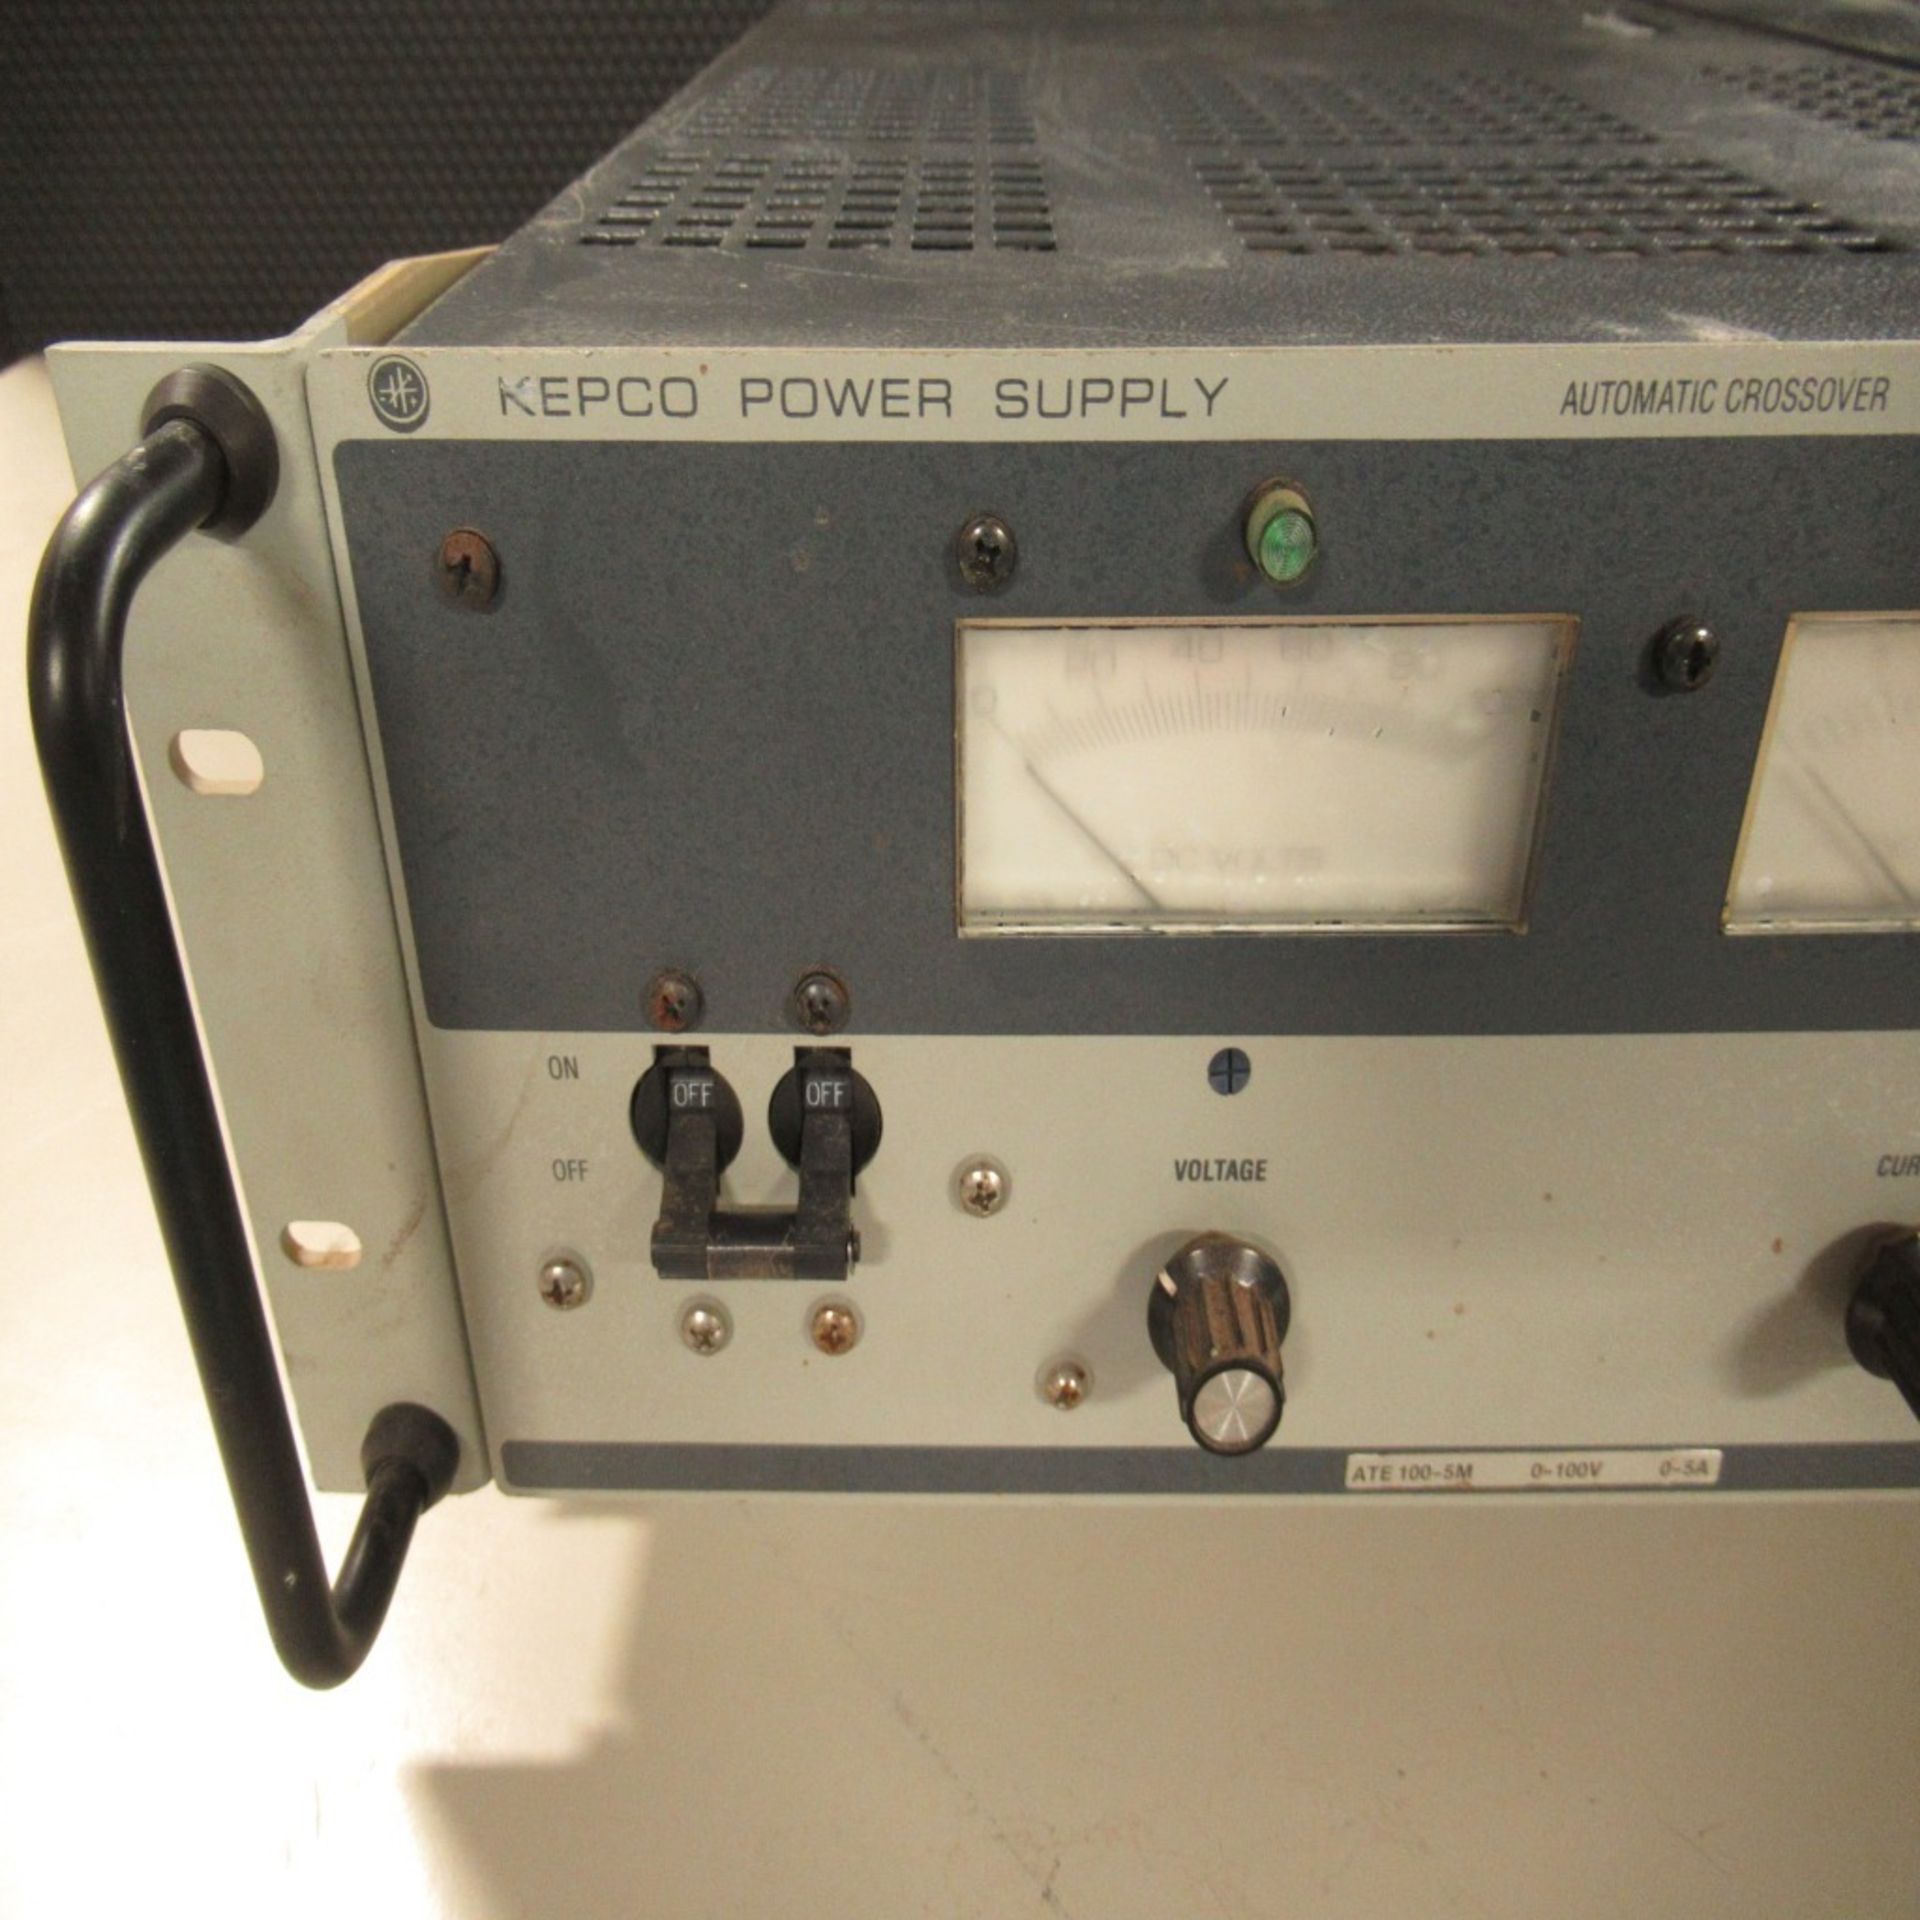 PHOTON SNAP SHOT MODEL 6000 *POWERS ON* NO SCREEN DISPLAY; FARNELL AP20-80 REGULATED POWER SUPPLY * - Image 30 of 222